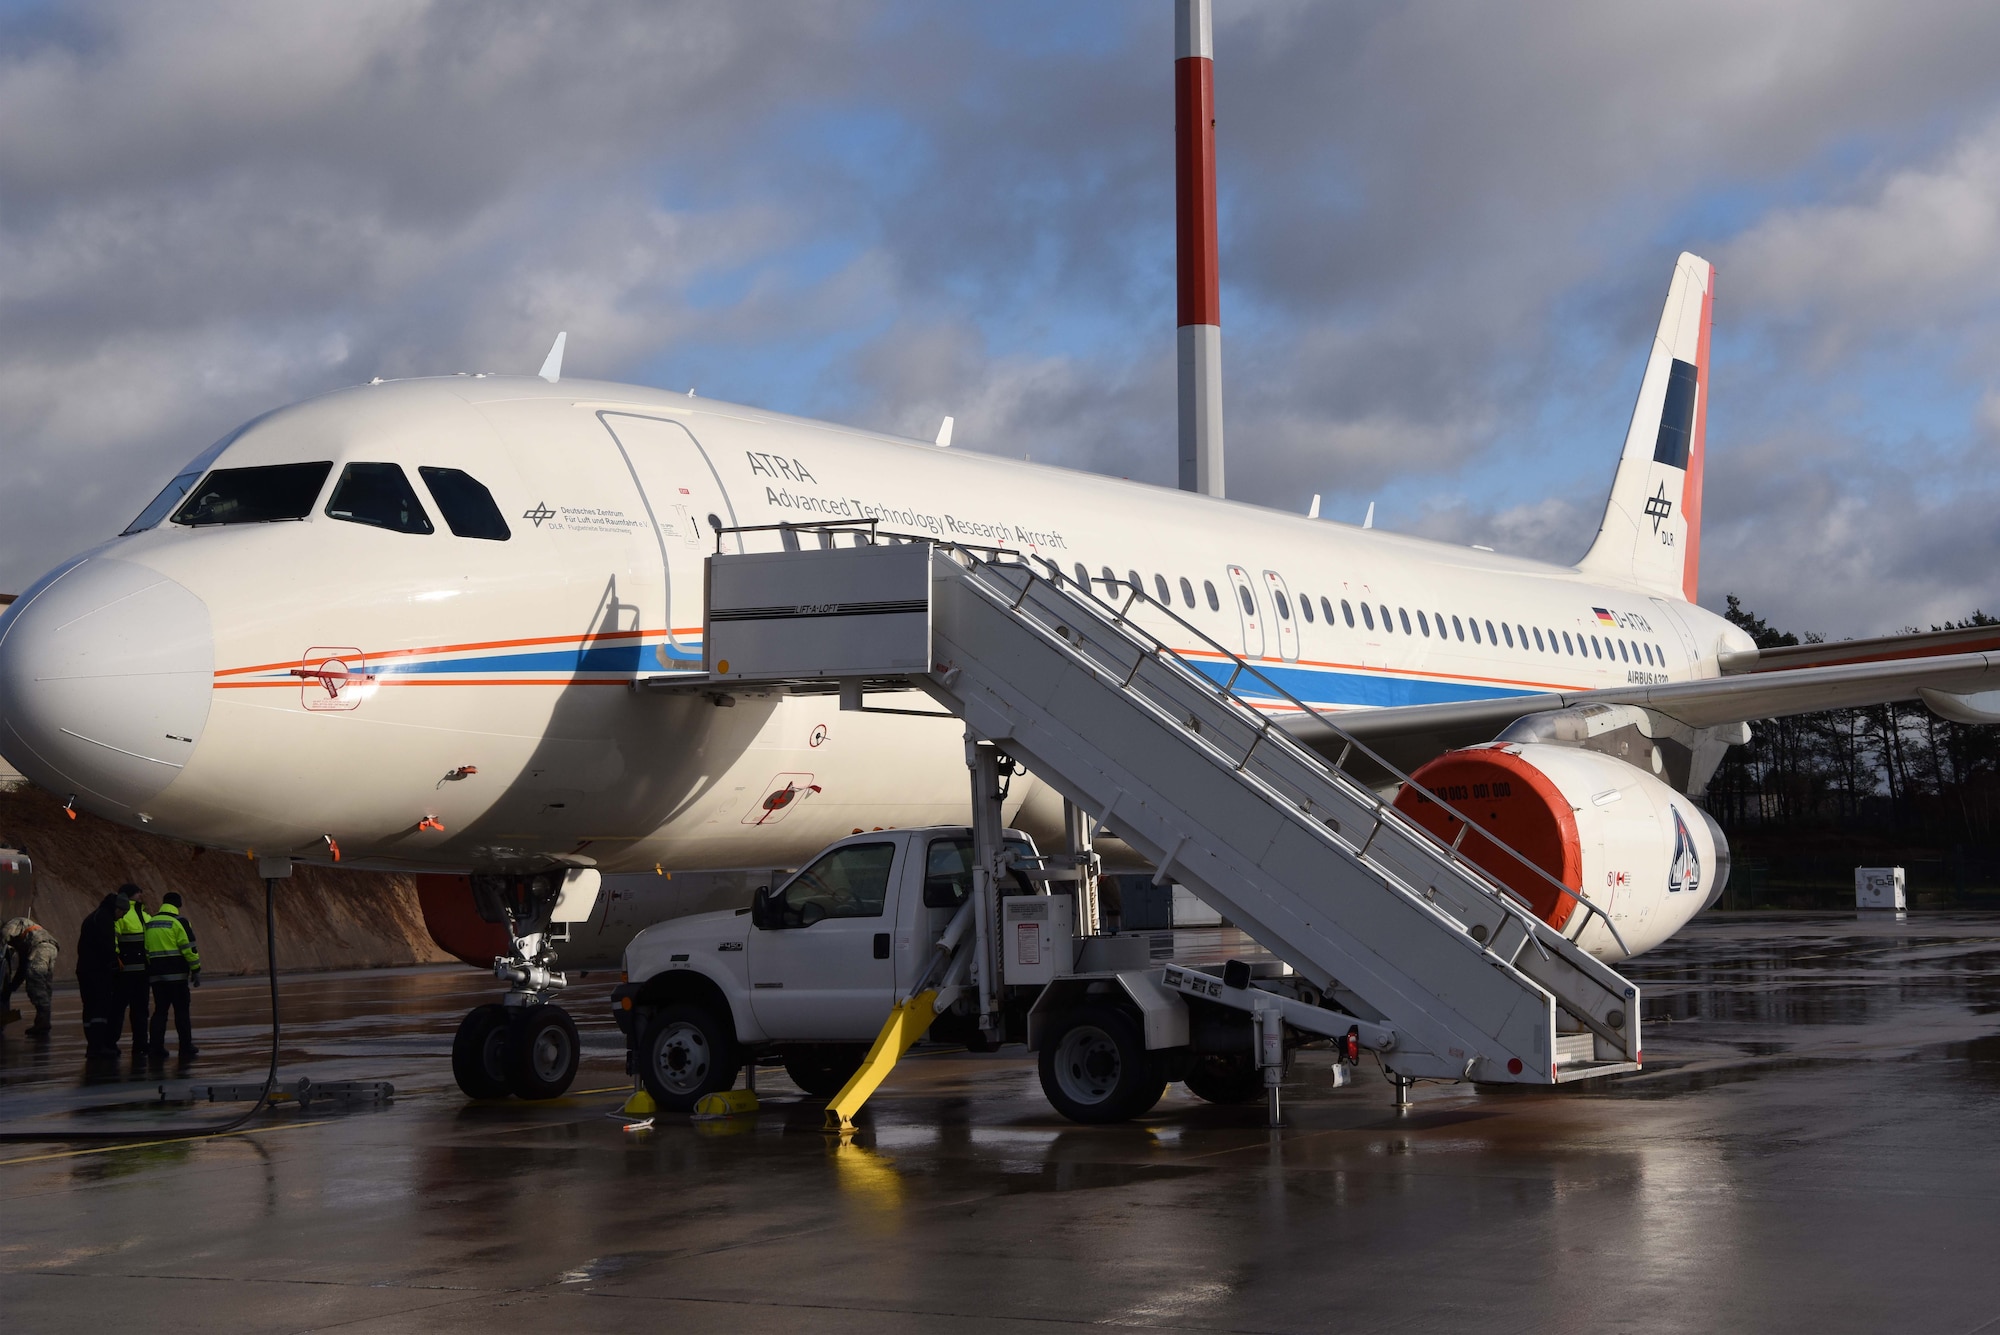 Maintainers from The German Aerospace Center prepare the Advanced Technology Research Aircraft Airbus A320 (D-ATRA), on Ramstein Air Base, Germany for a day of bio-fuel testing. The A320 is the latest and largest addition to the DLR’s research fleet.